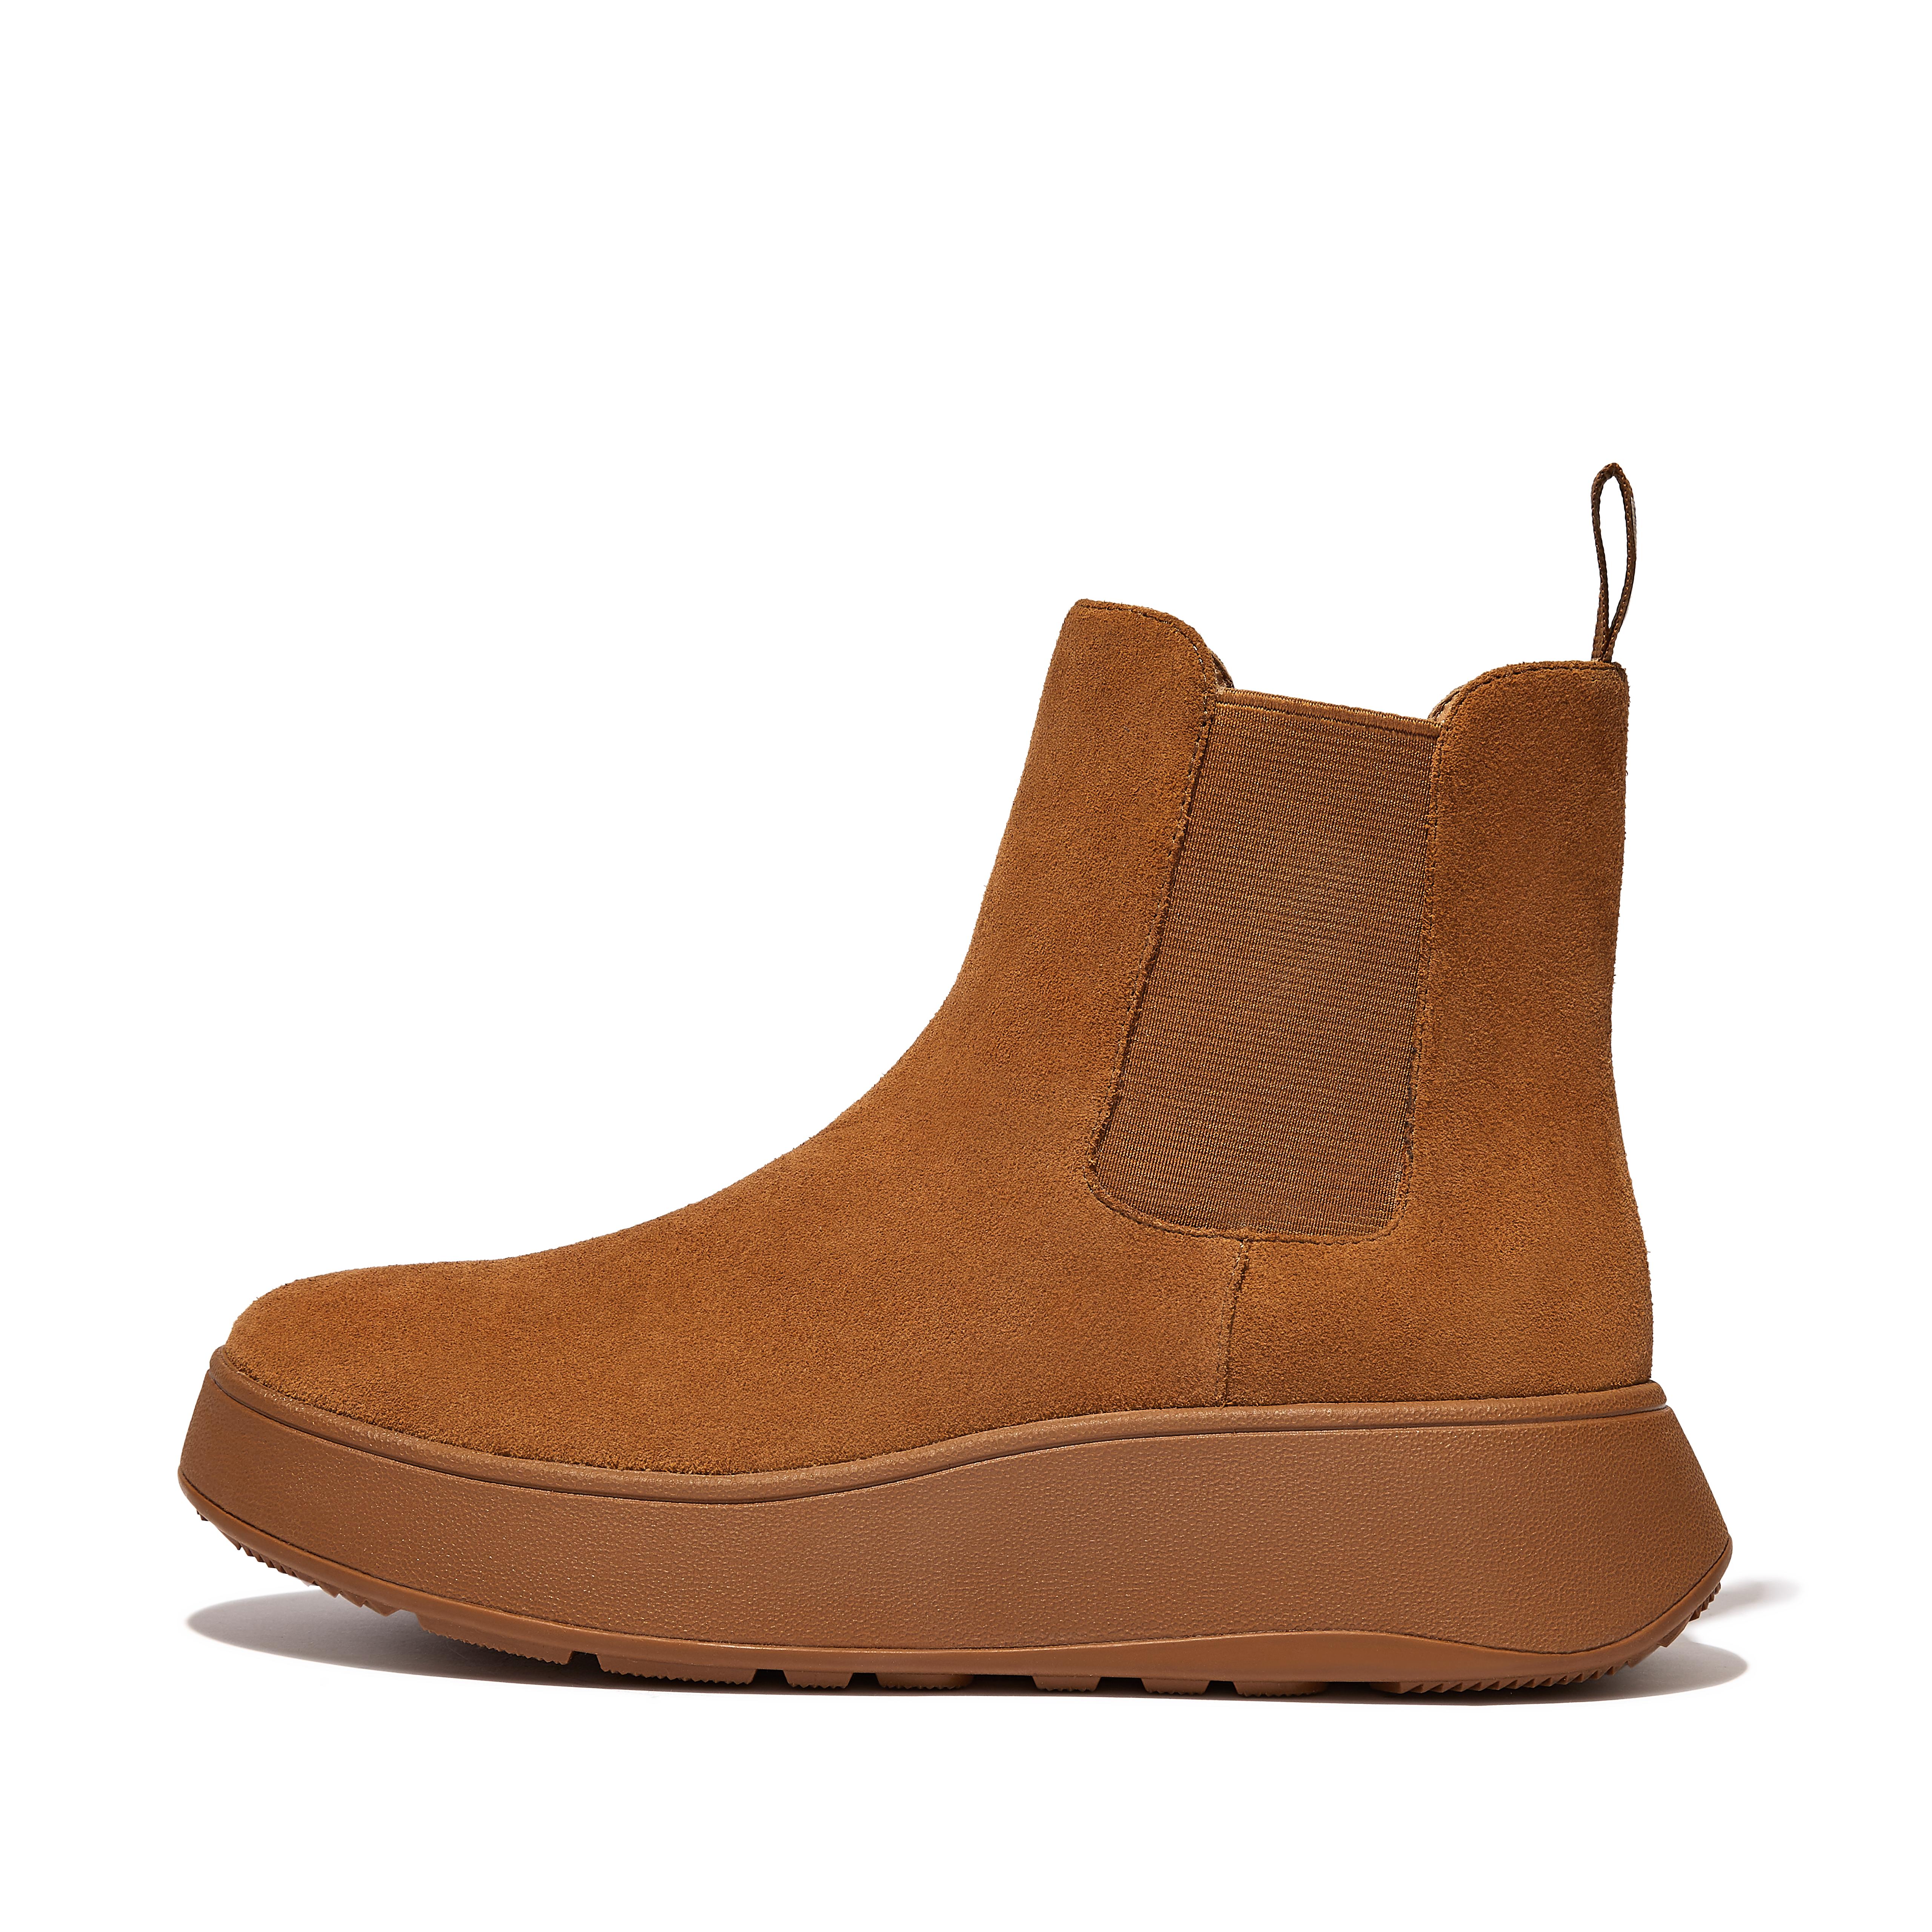 Fitflop Suede Flatform Chelsea Boots